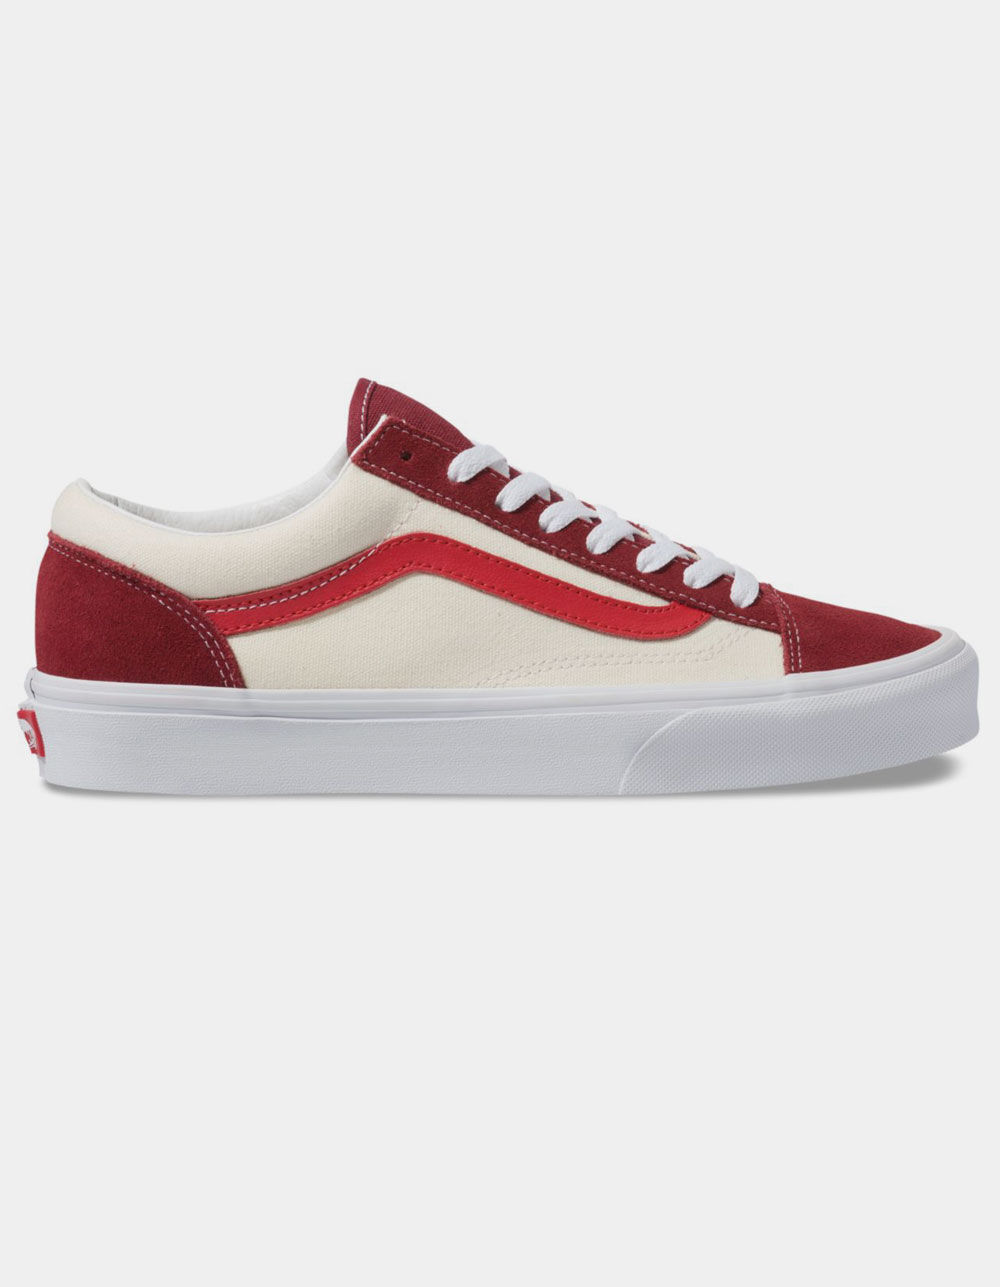 VANS Retro Sport Style 36 Biking Red & Poinsettia Shoes image number 0